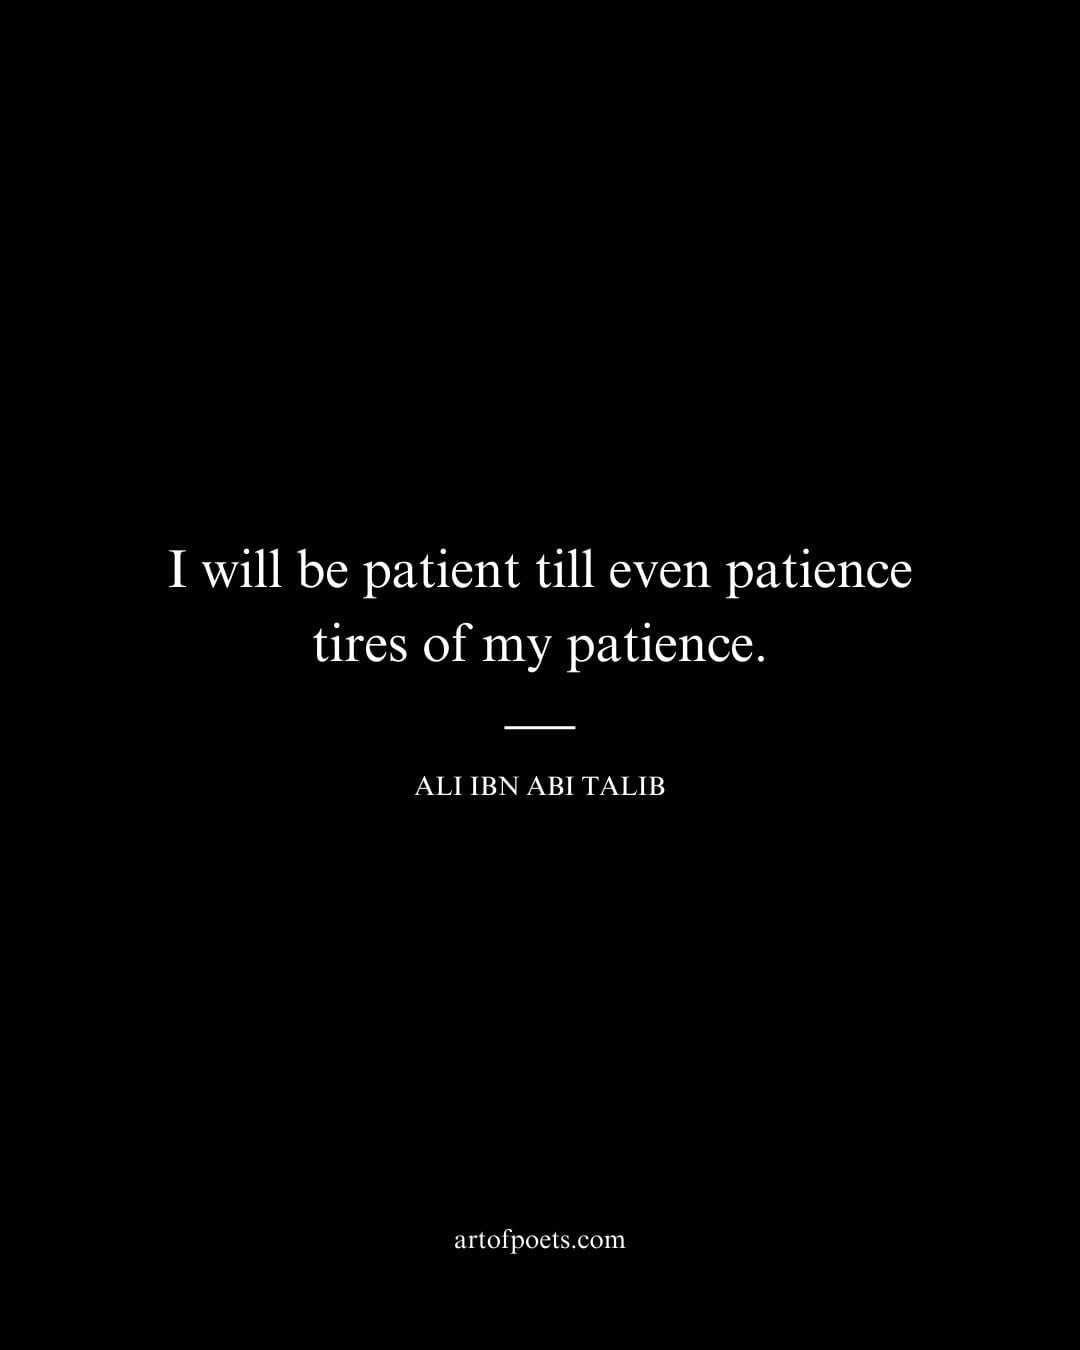 I will be patient till even patience tires of my patience